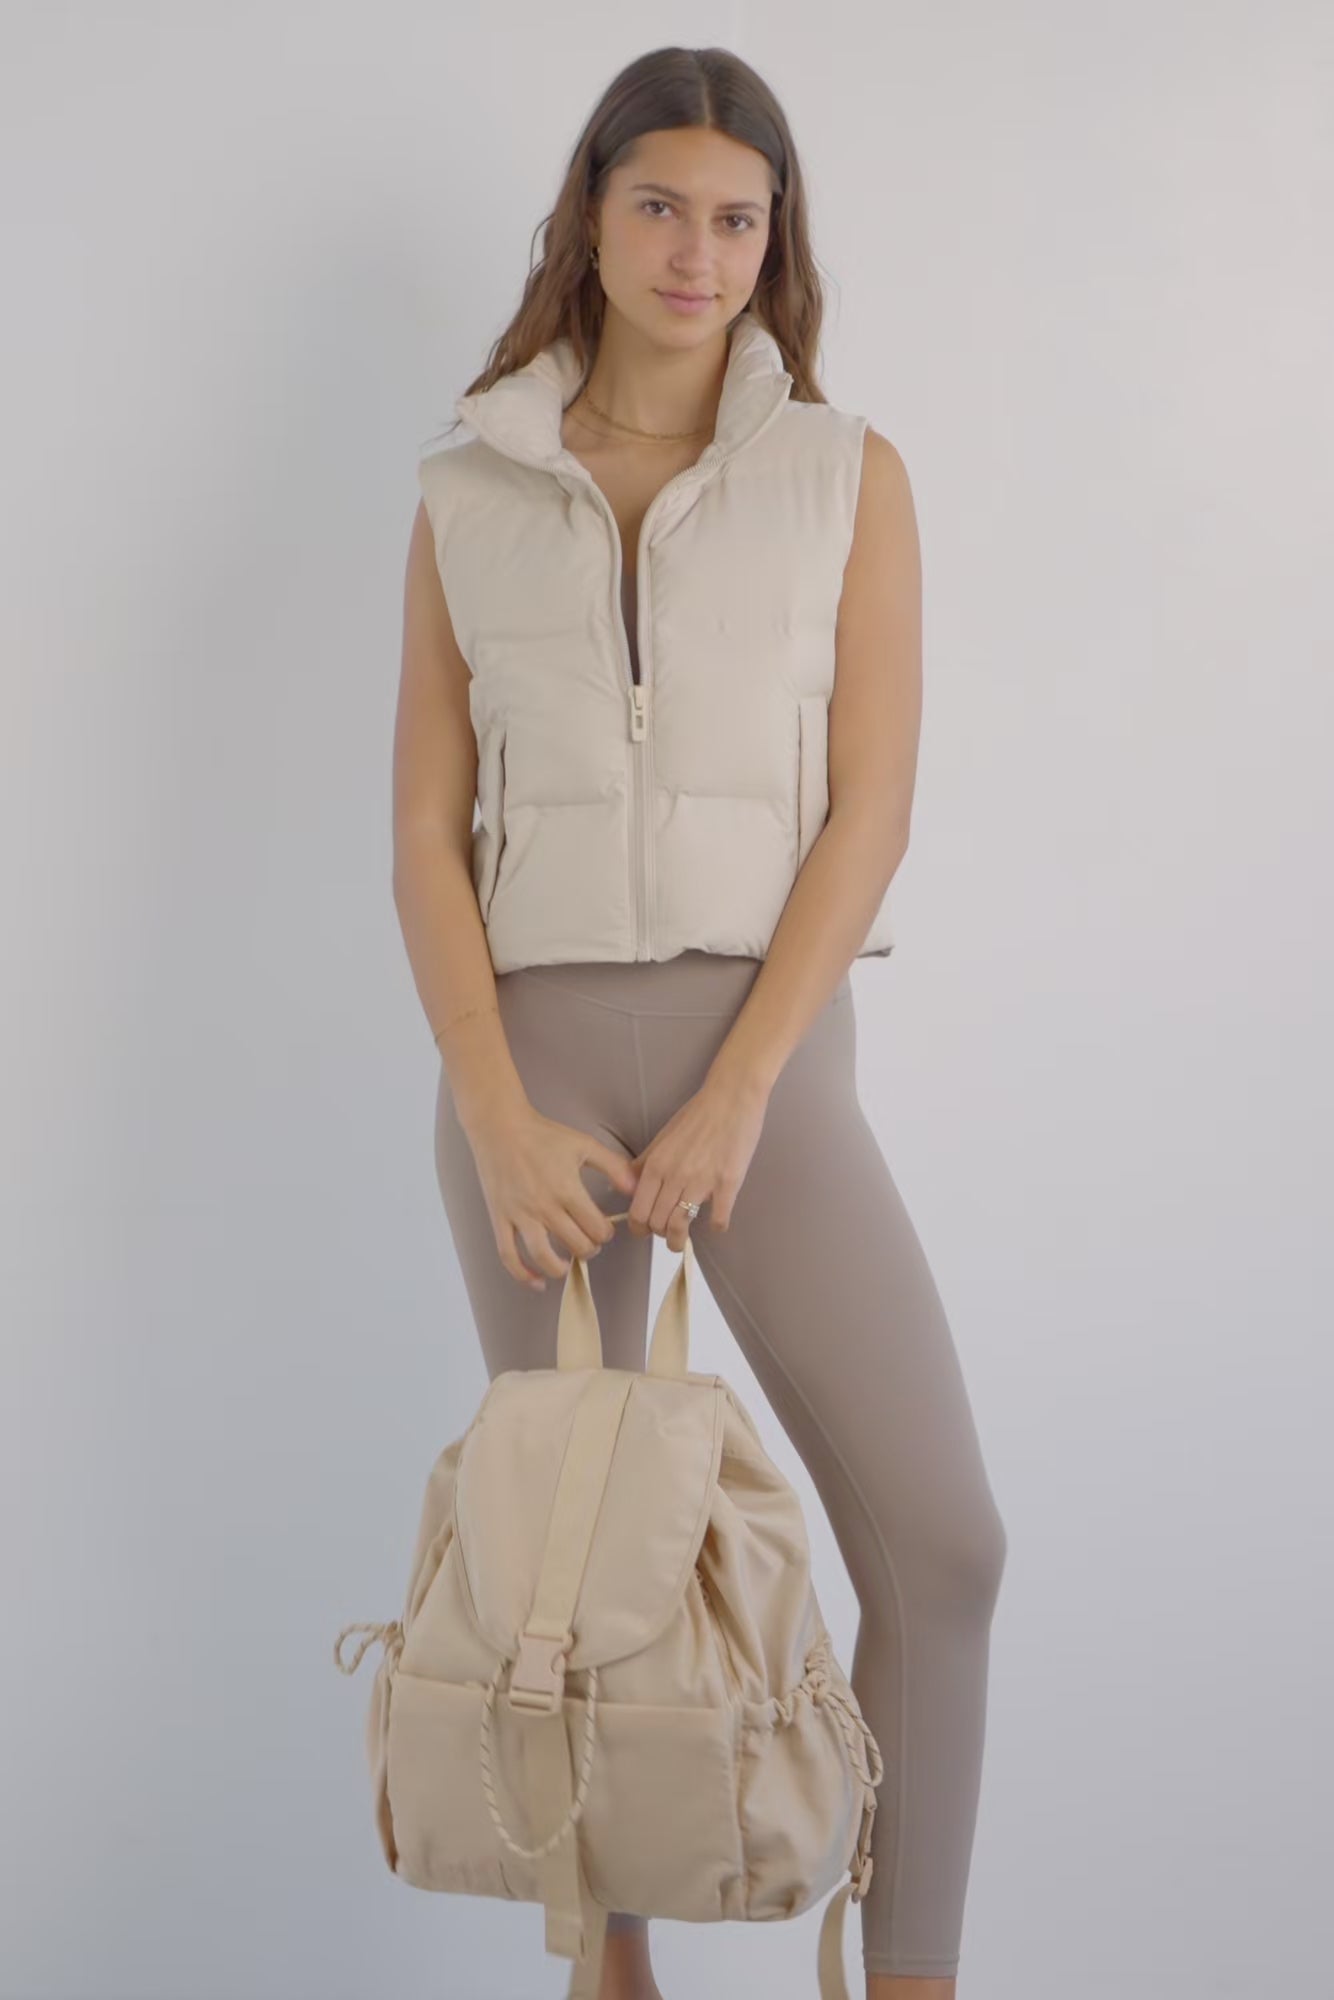 BÉIS 'The Sport Backpack' in Beige - Chic Tennis Inspired Backpack